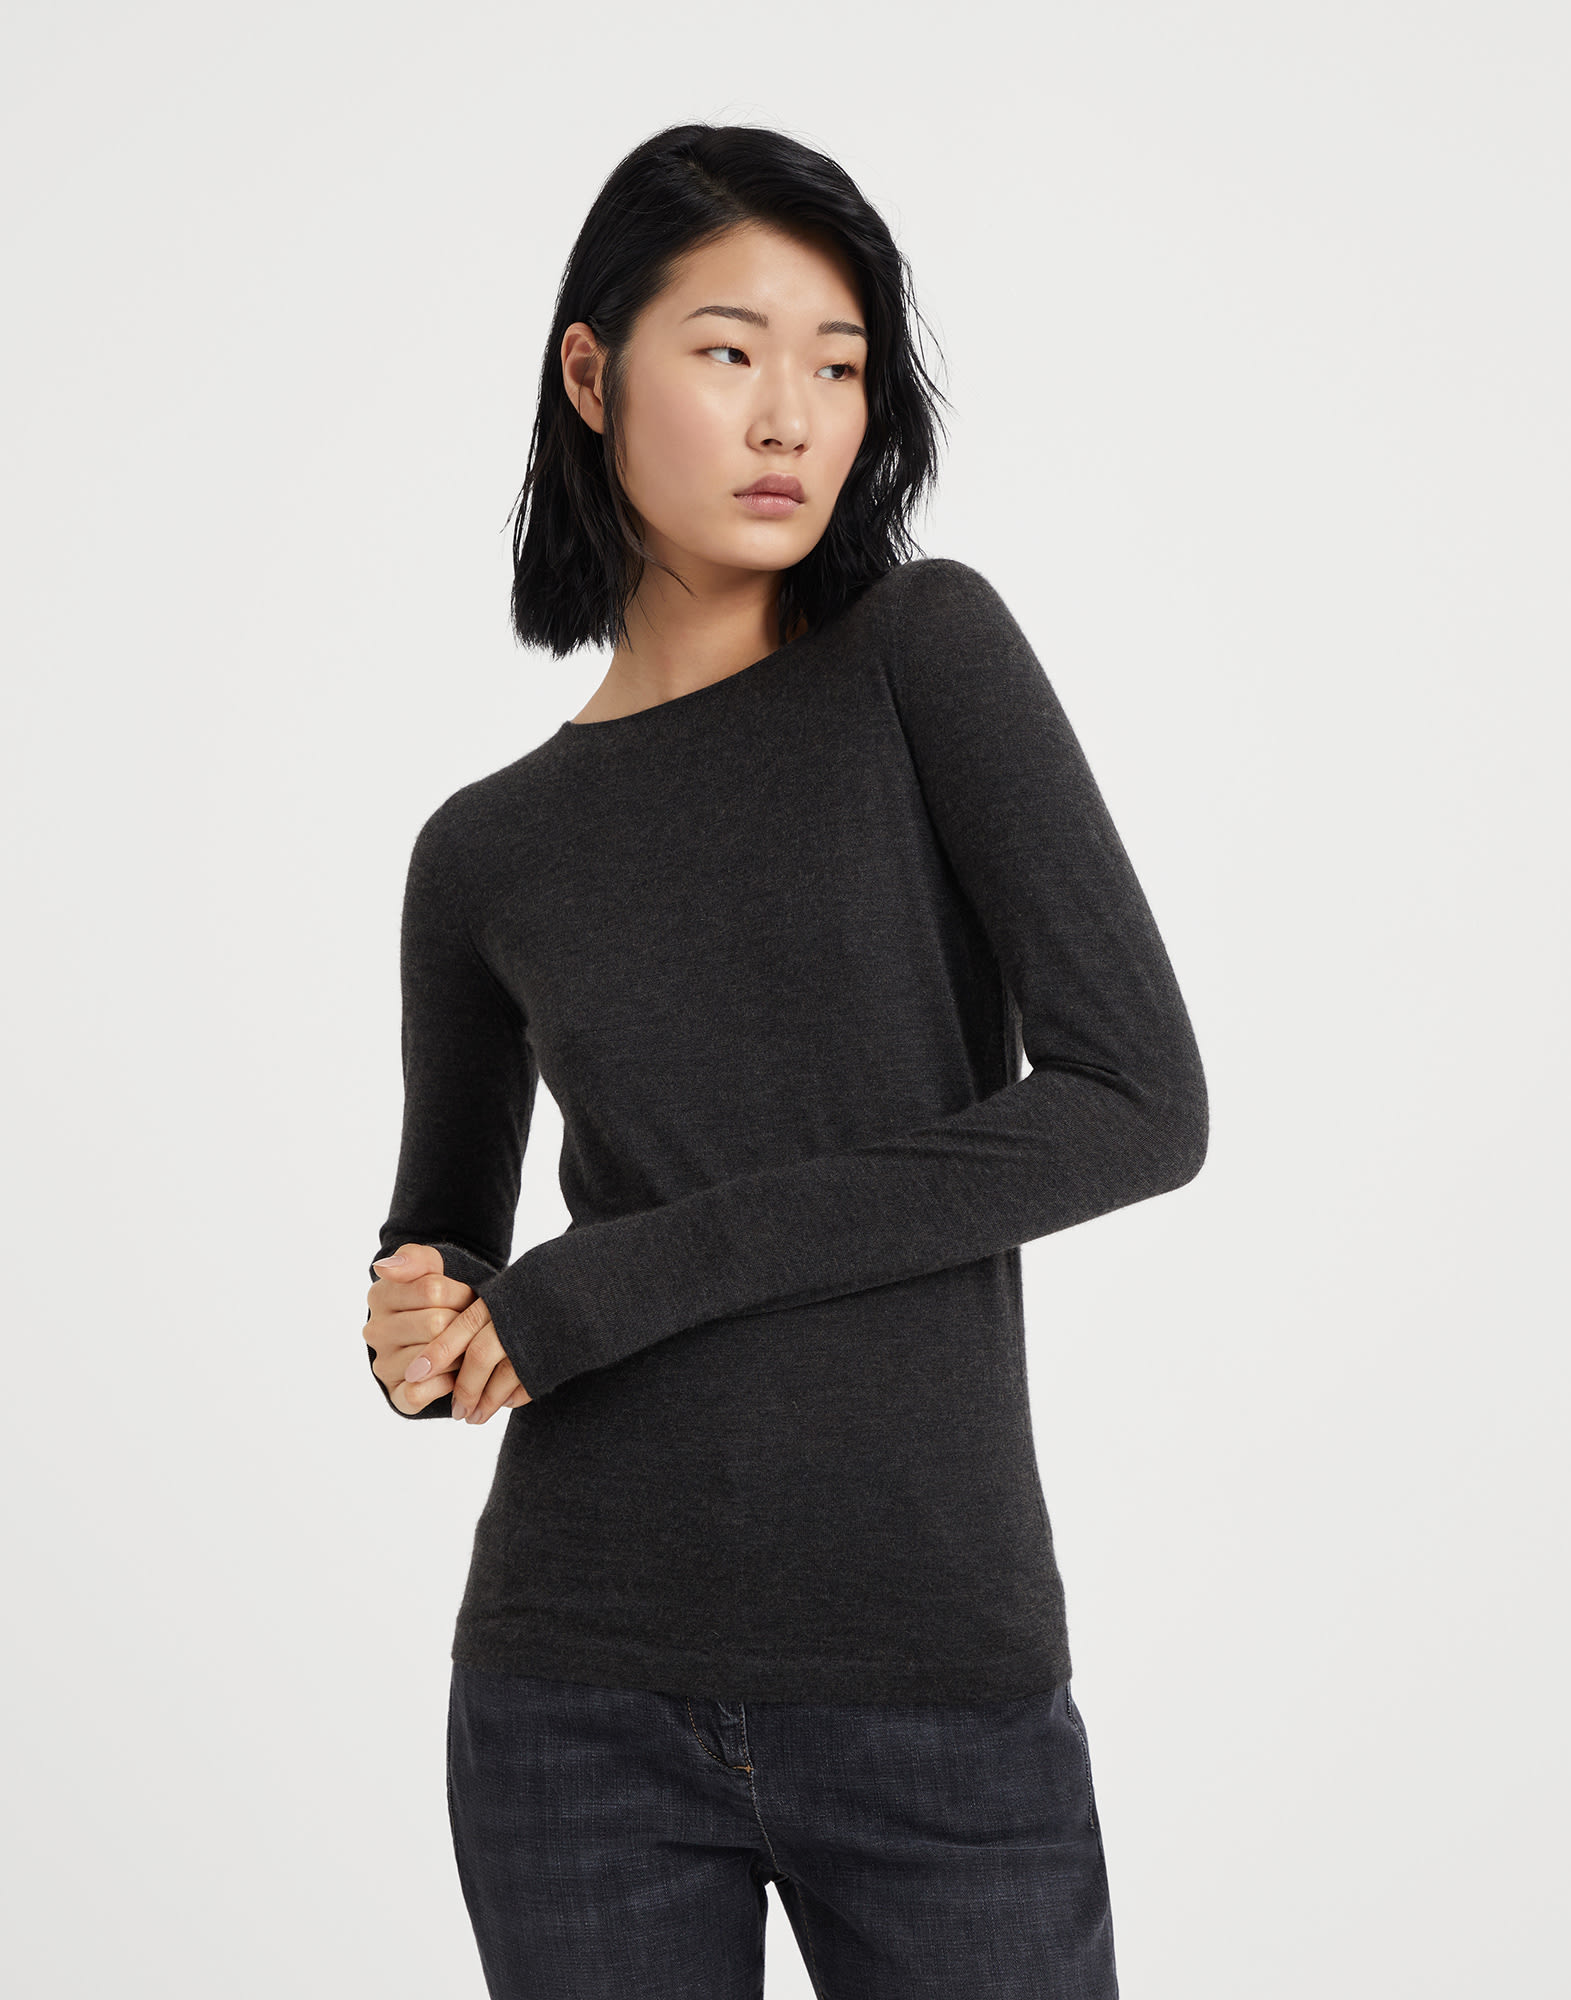 Cashmere and silk sweater